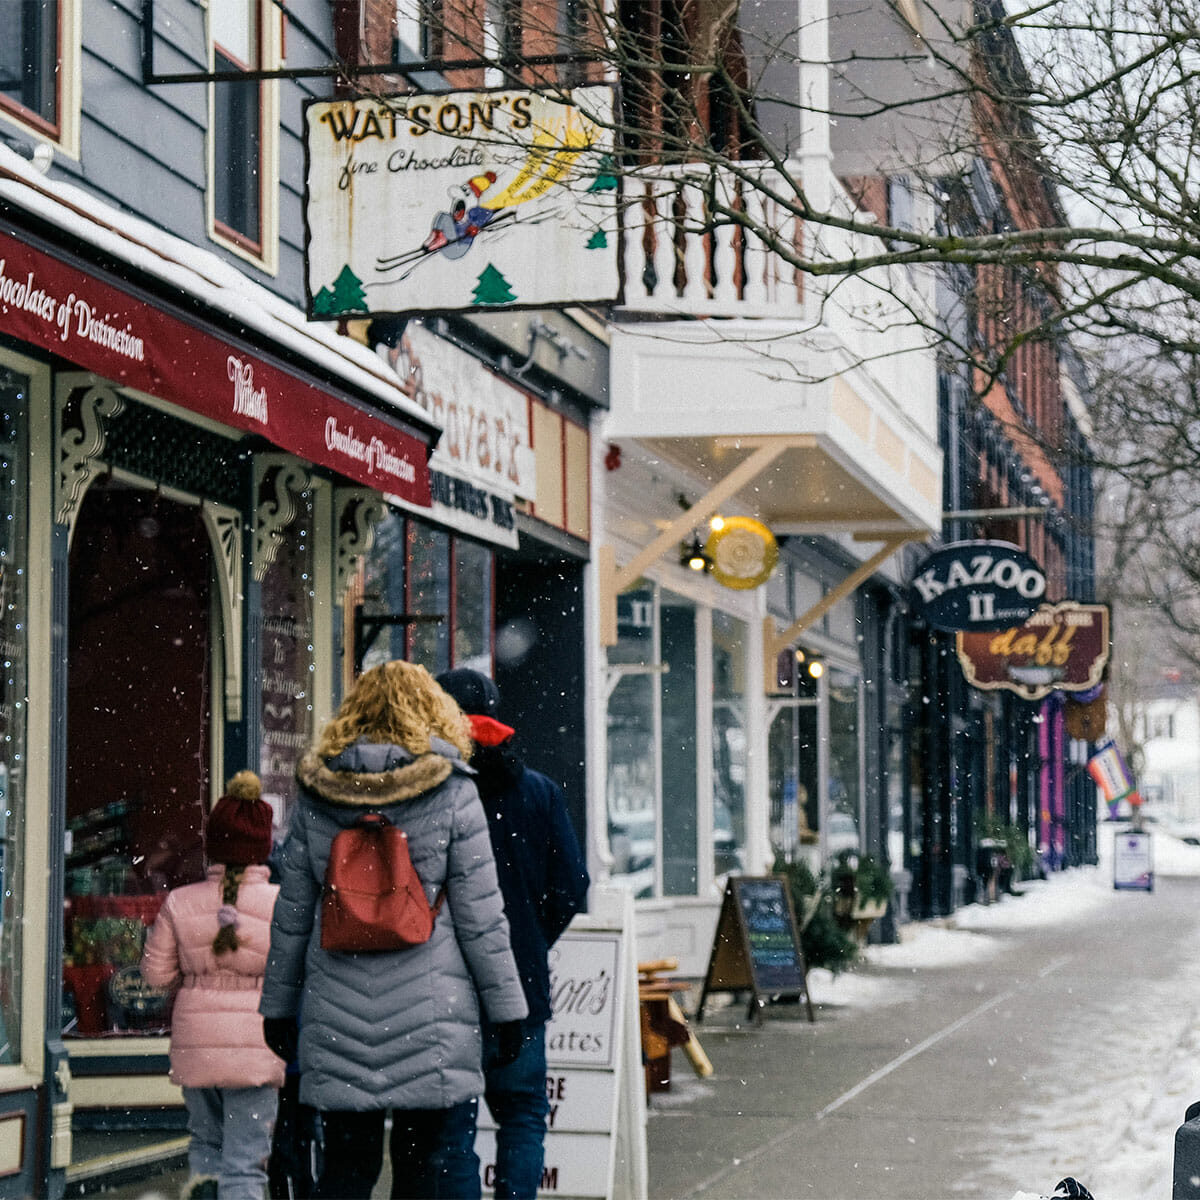 We’re a stones throw away from Ellicotville, WNY’s favorite mountain town.